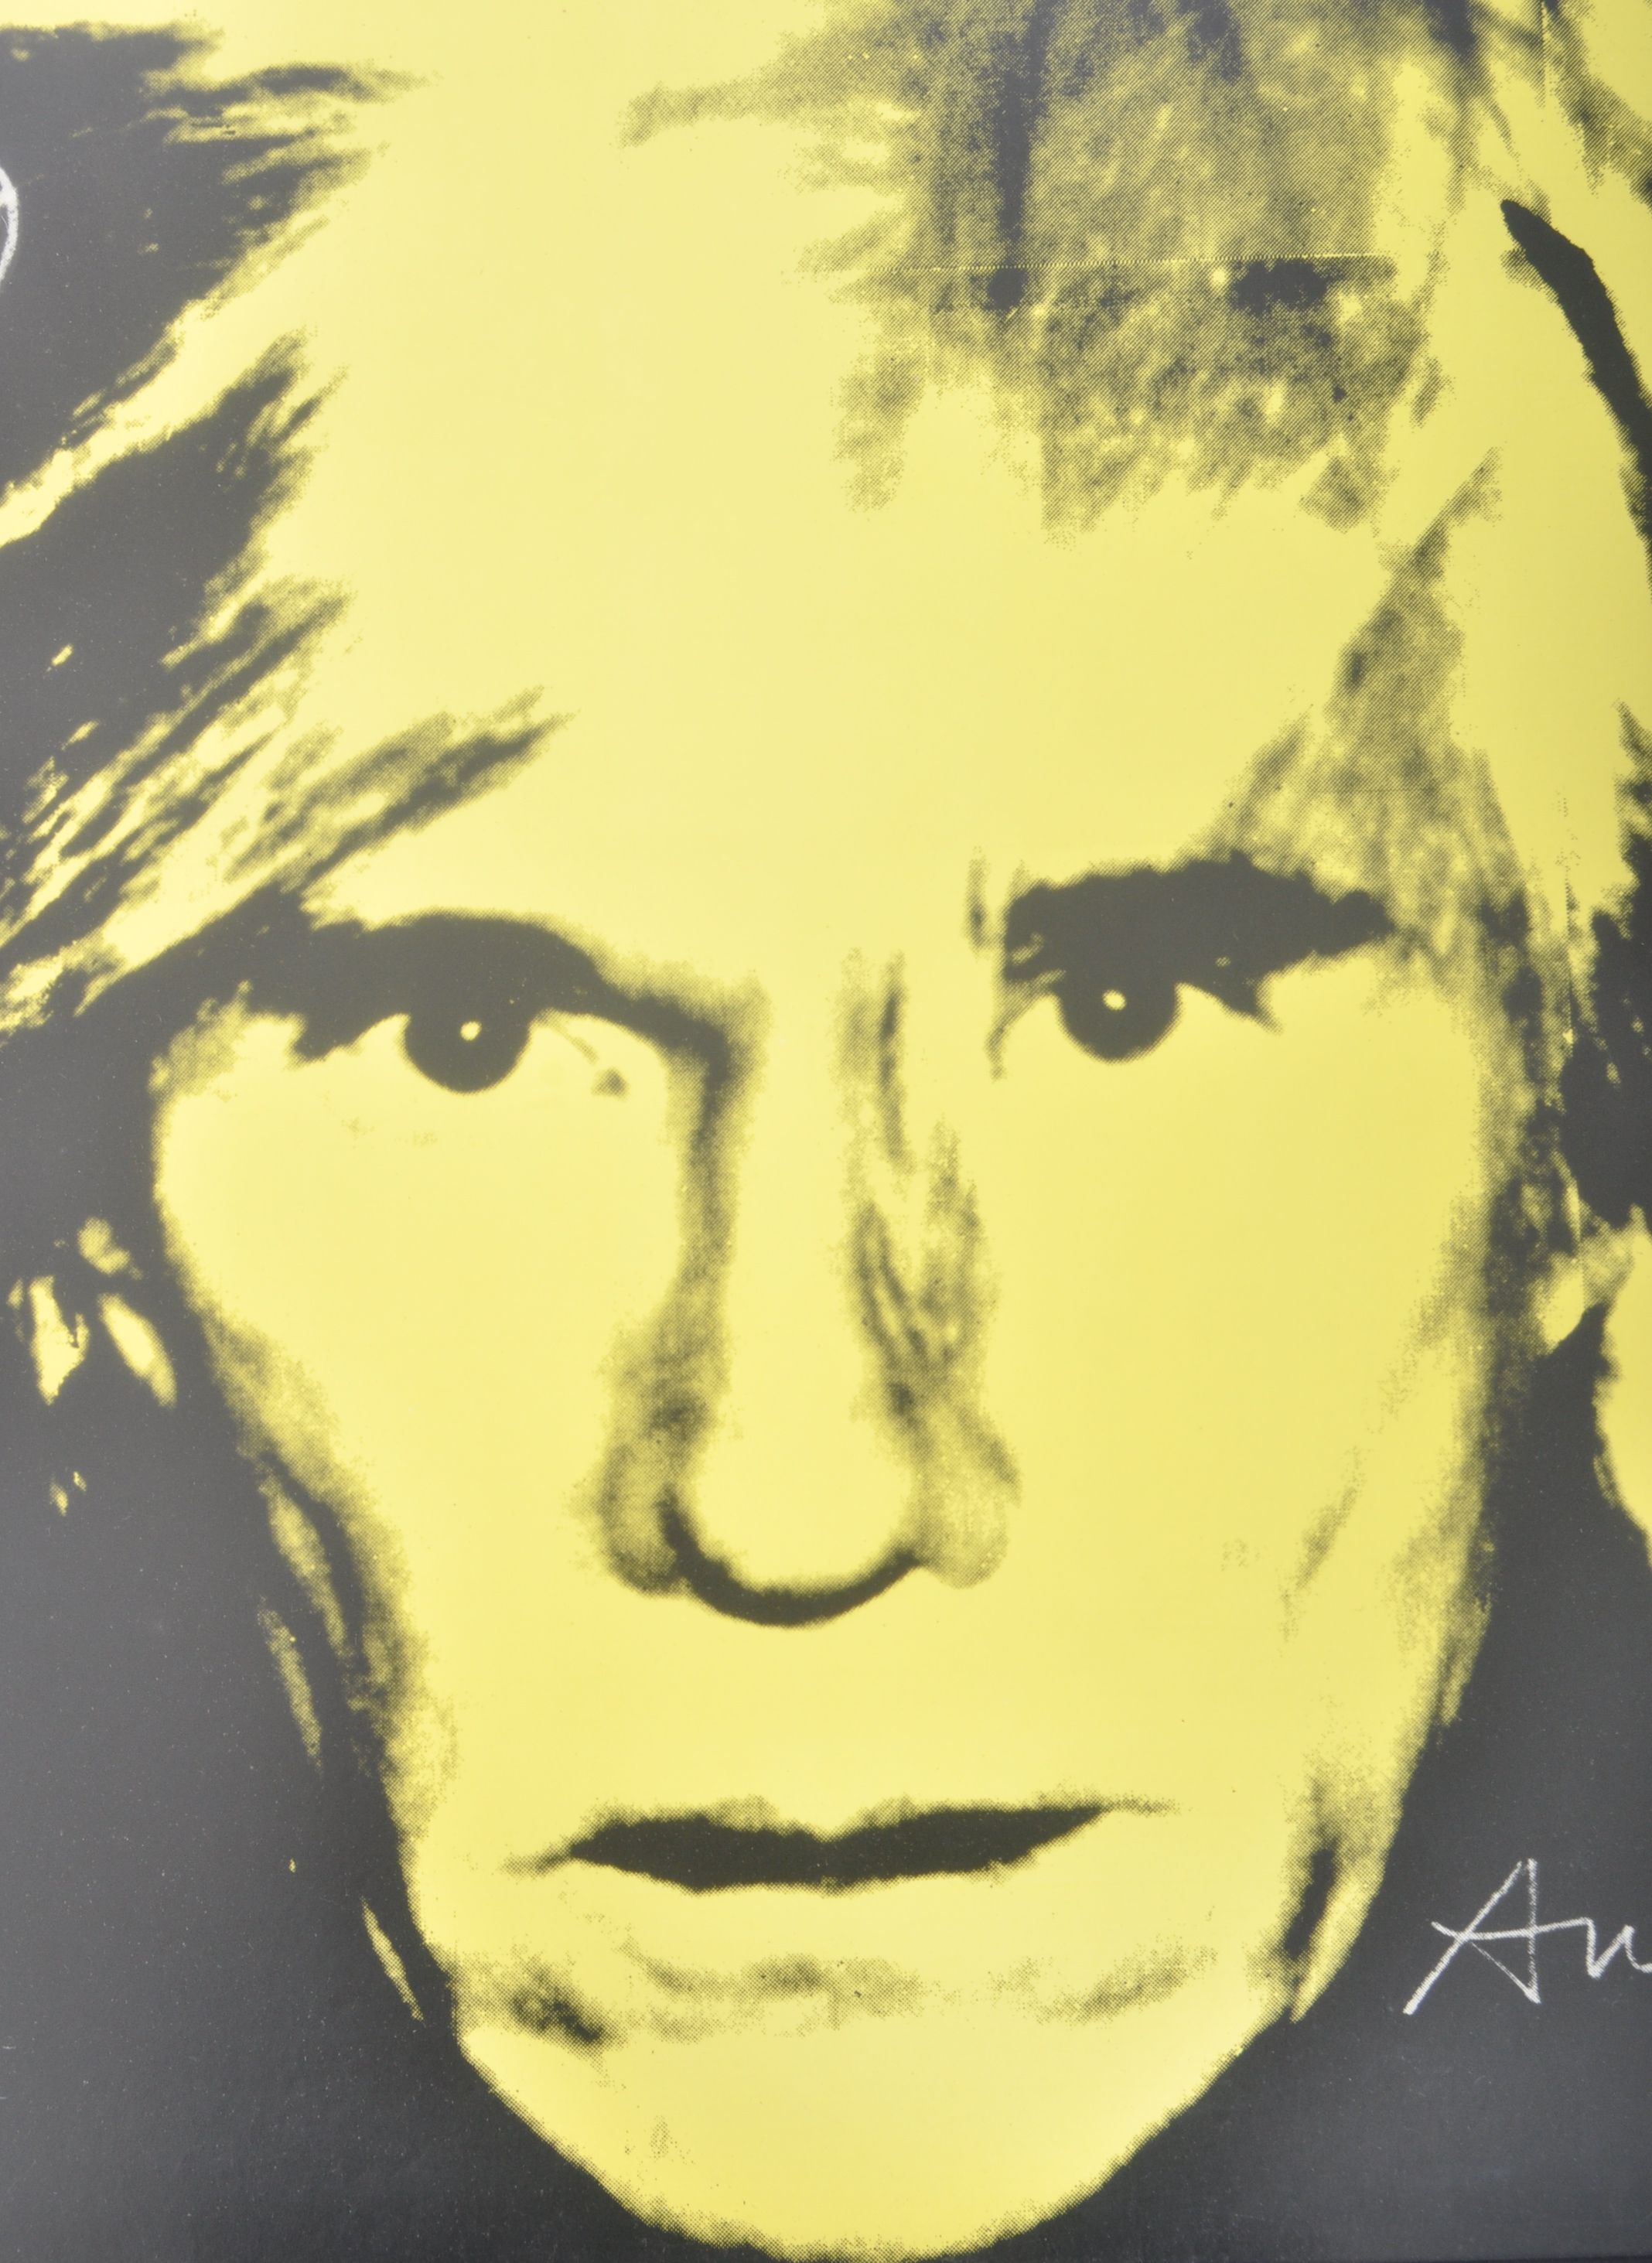 AFTER ANDY WARHOL - WILLIAMS COLLEGE LITHOGRAPH - Image 5 of 8